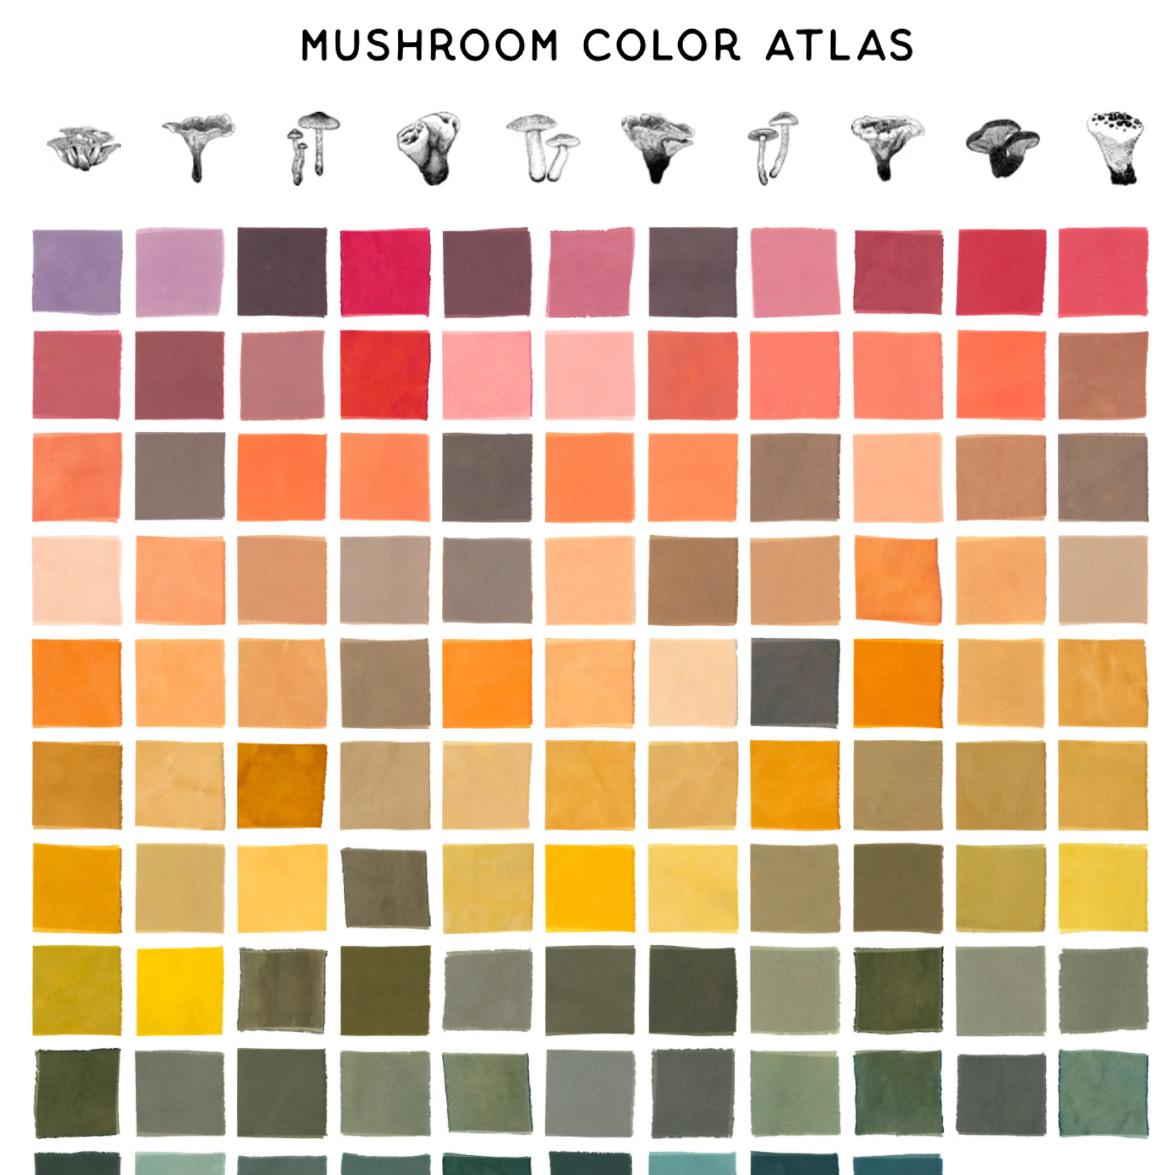 Color palette from the Mushroom Color Atlas.